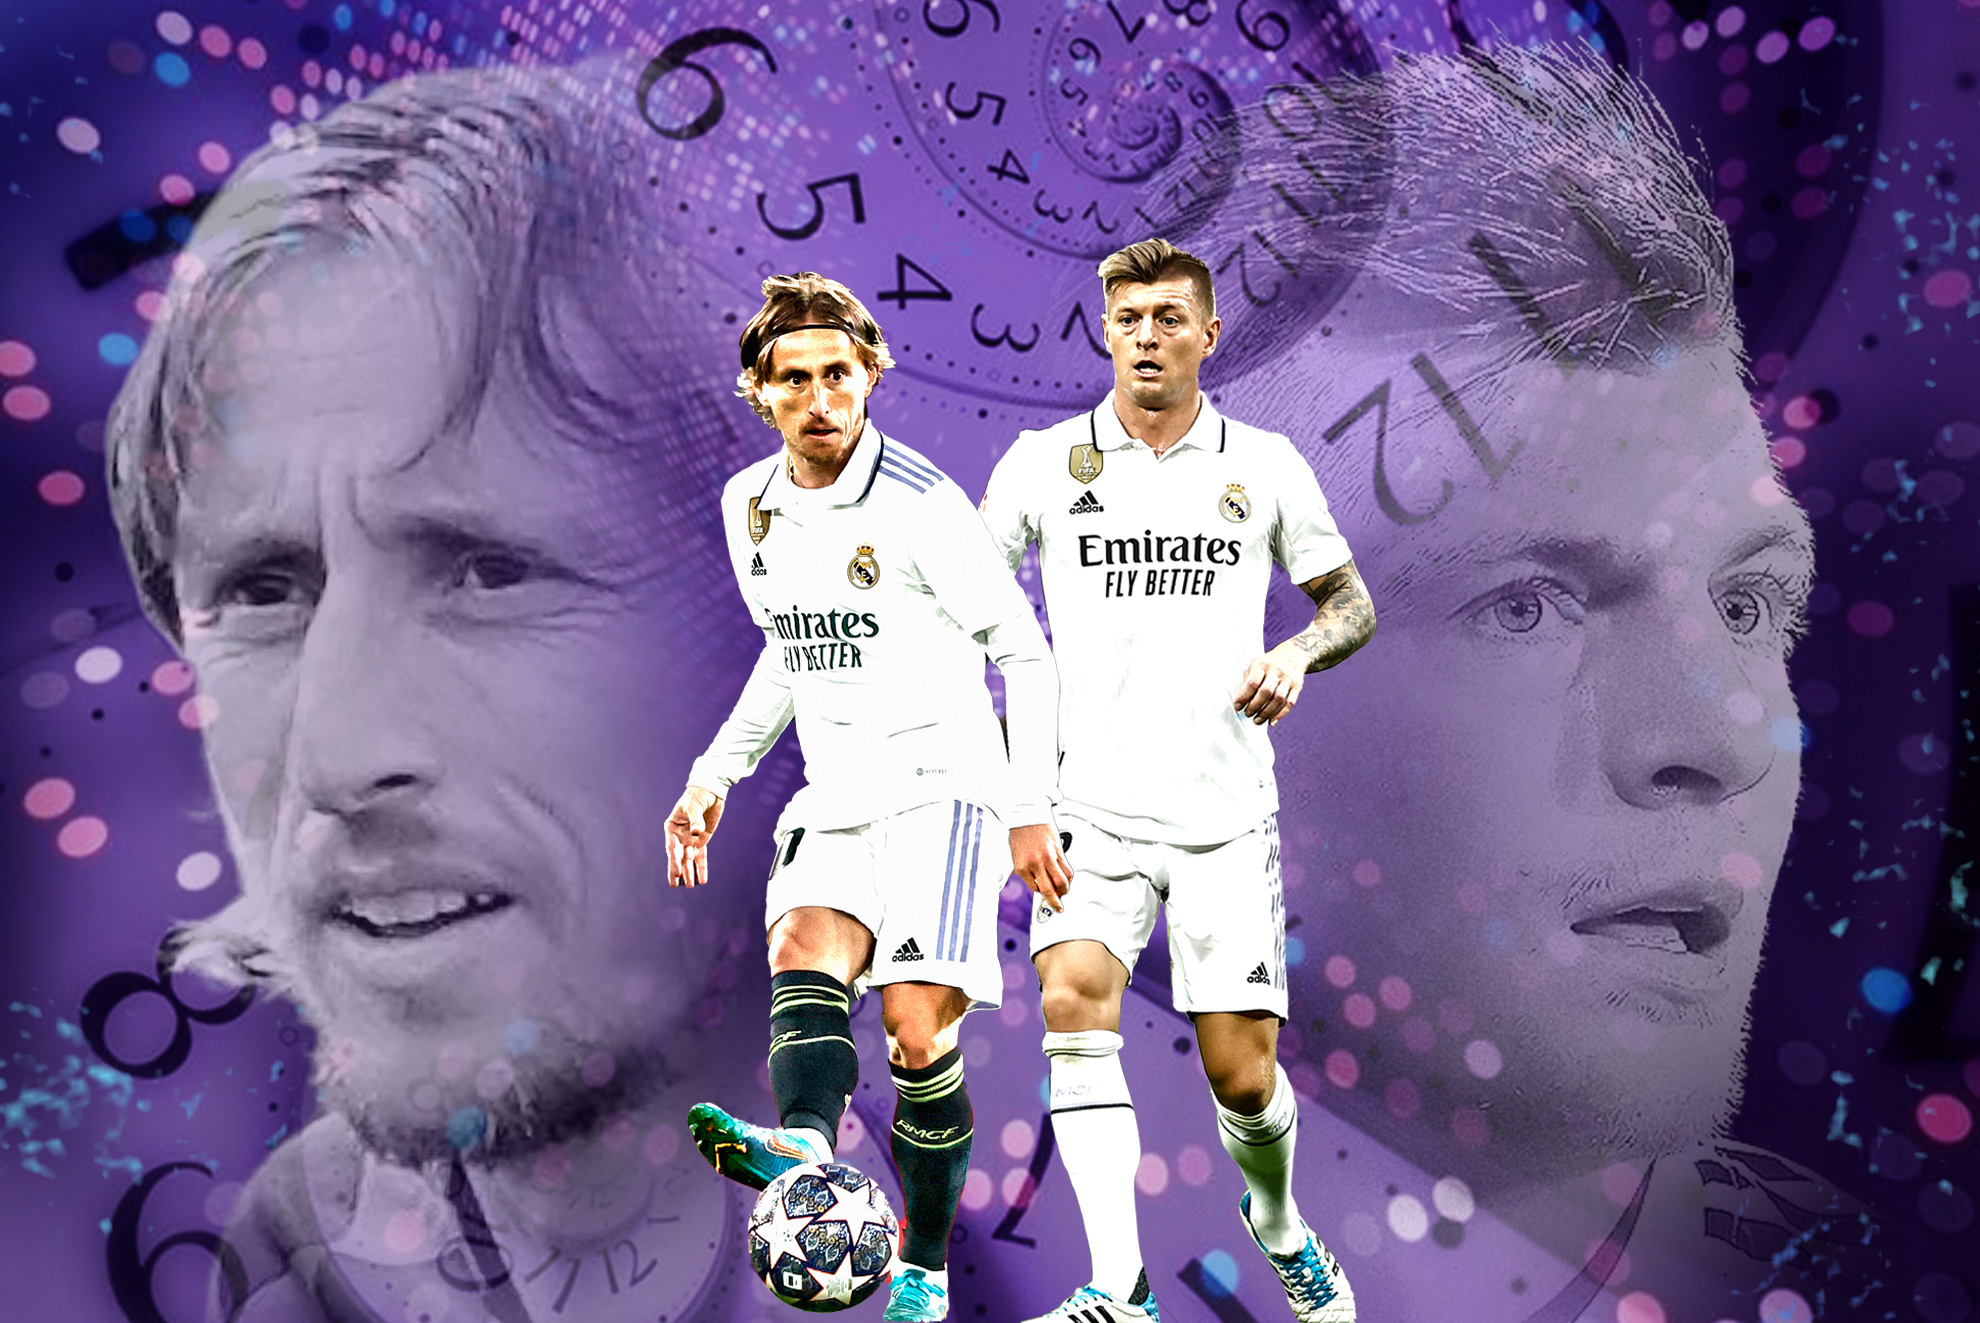 Modric-Kroos, a legendary duo preparing for their final journey together